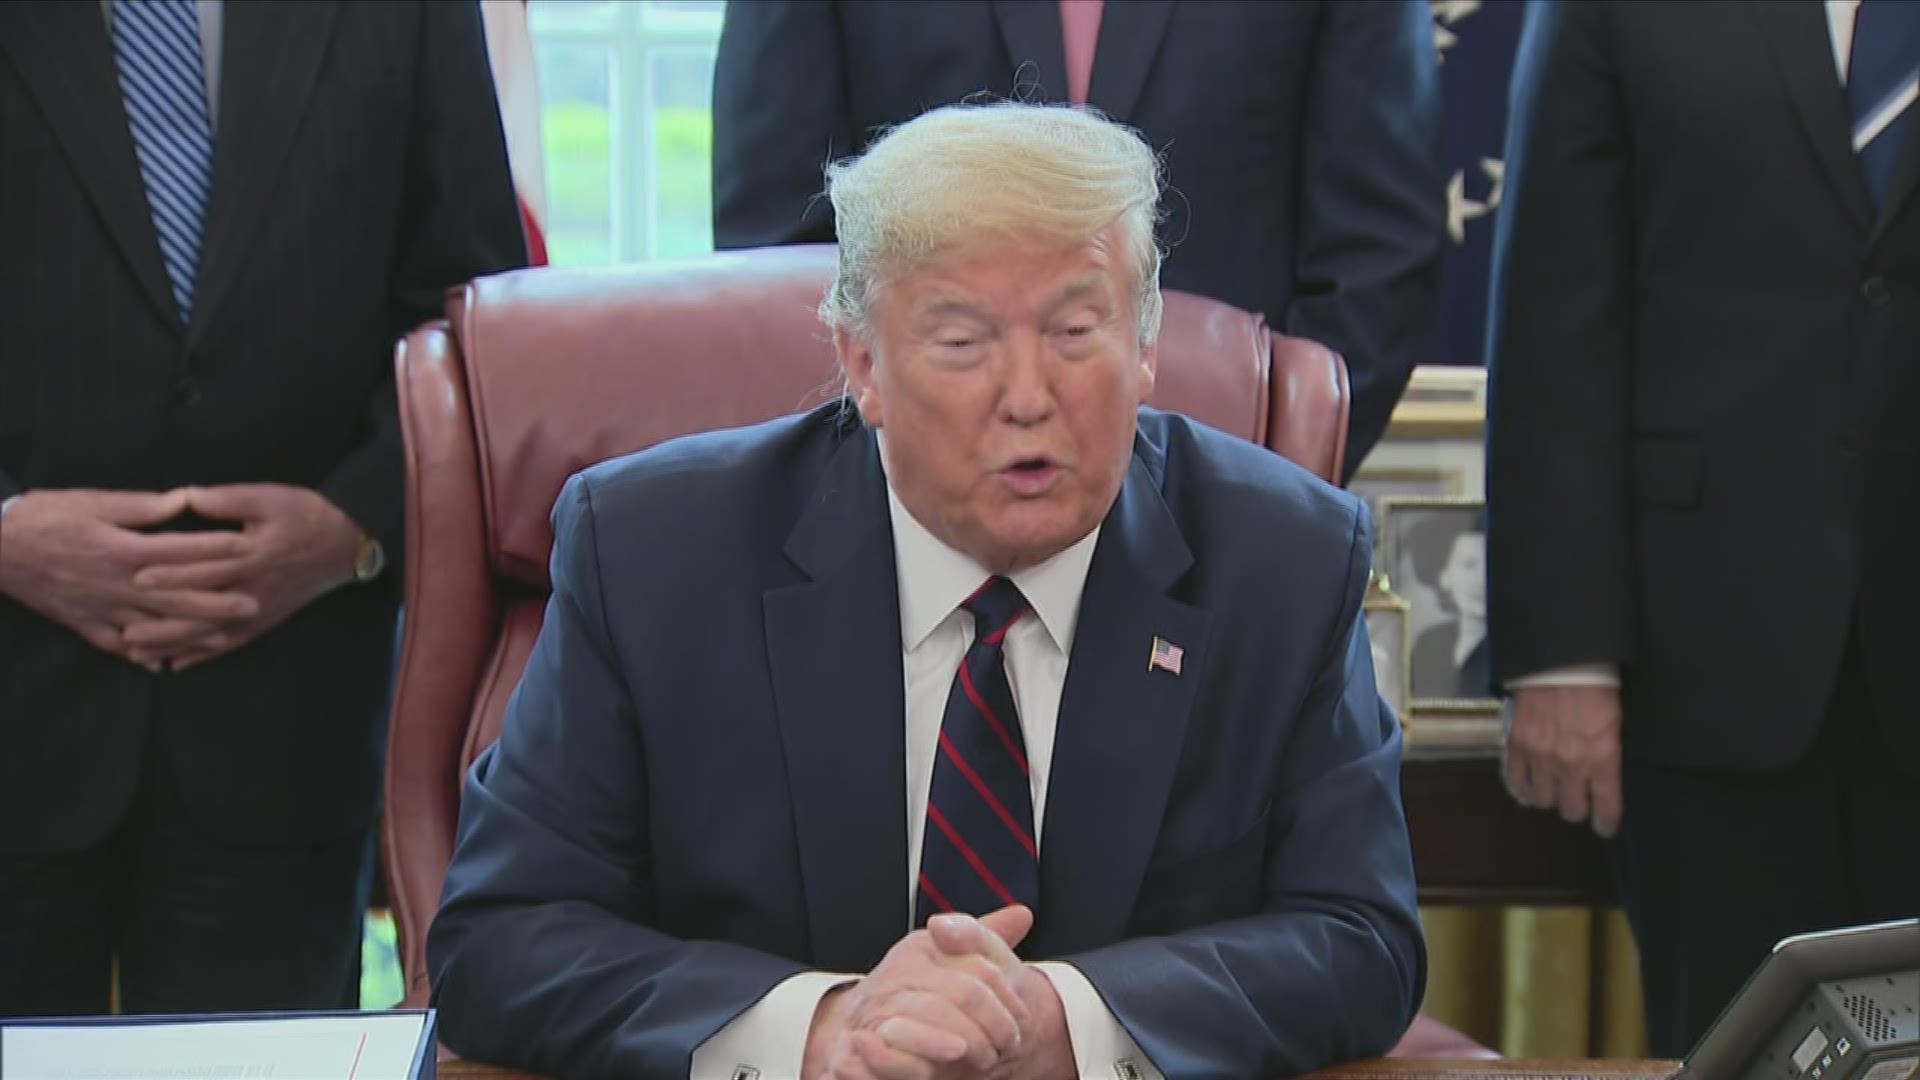 President Trump discussed in the Oval Office Friday the $2.2 trillion economic rescue package to help Americans during the coronavirus outbreak.